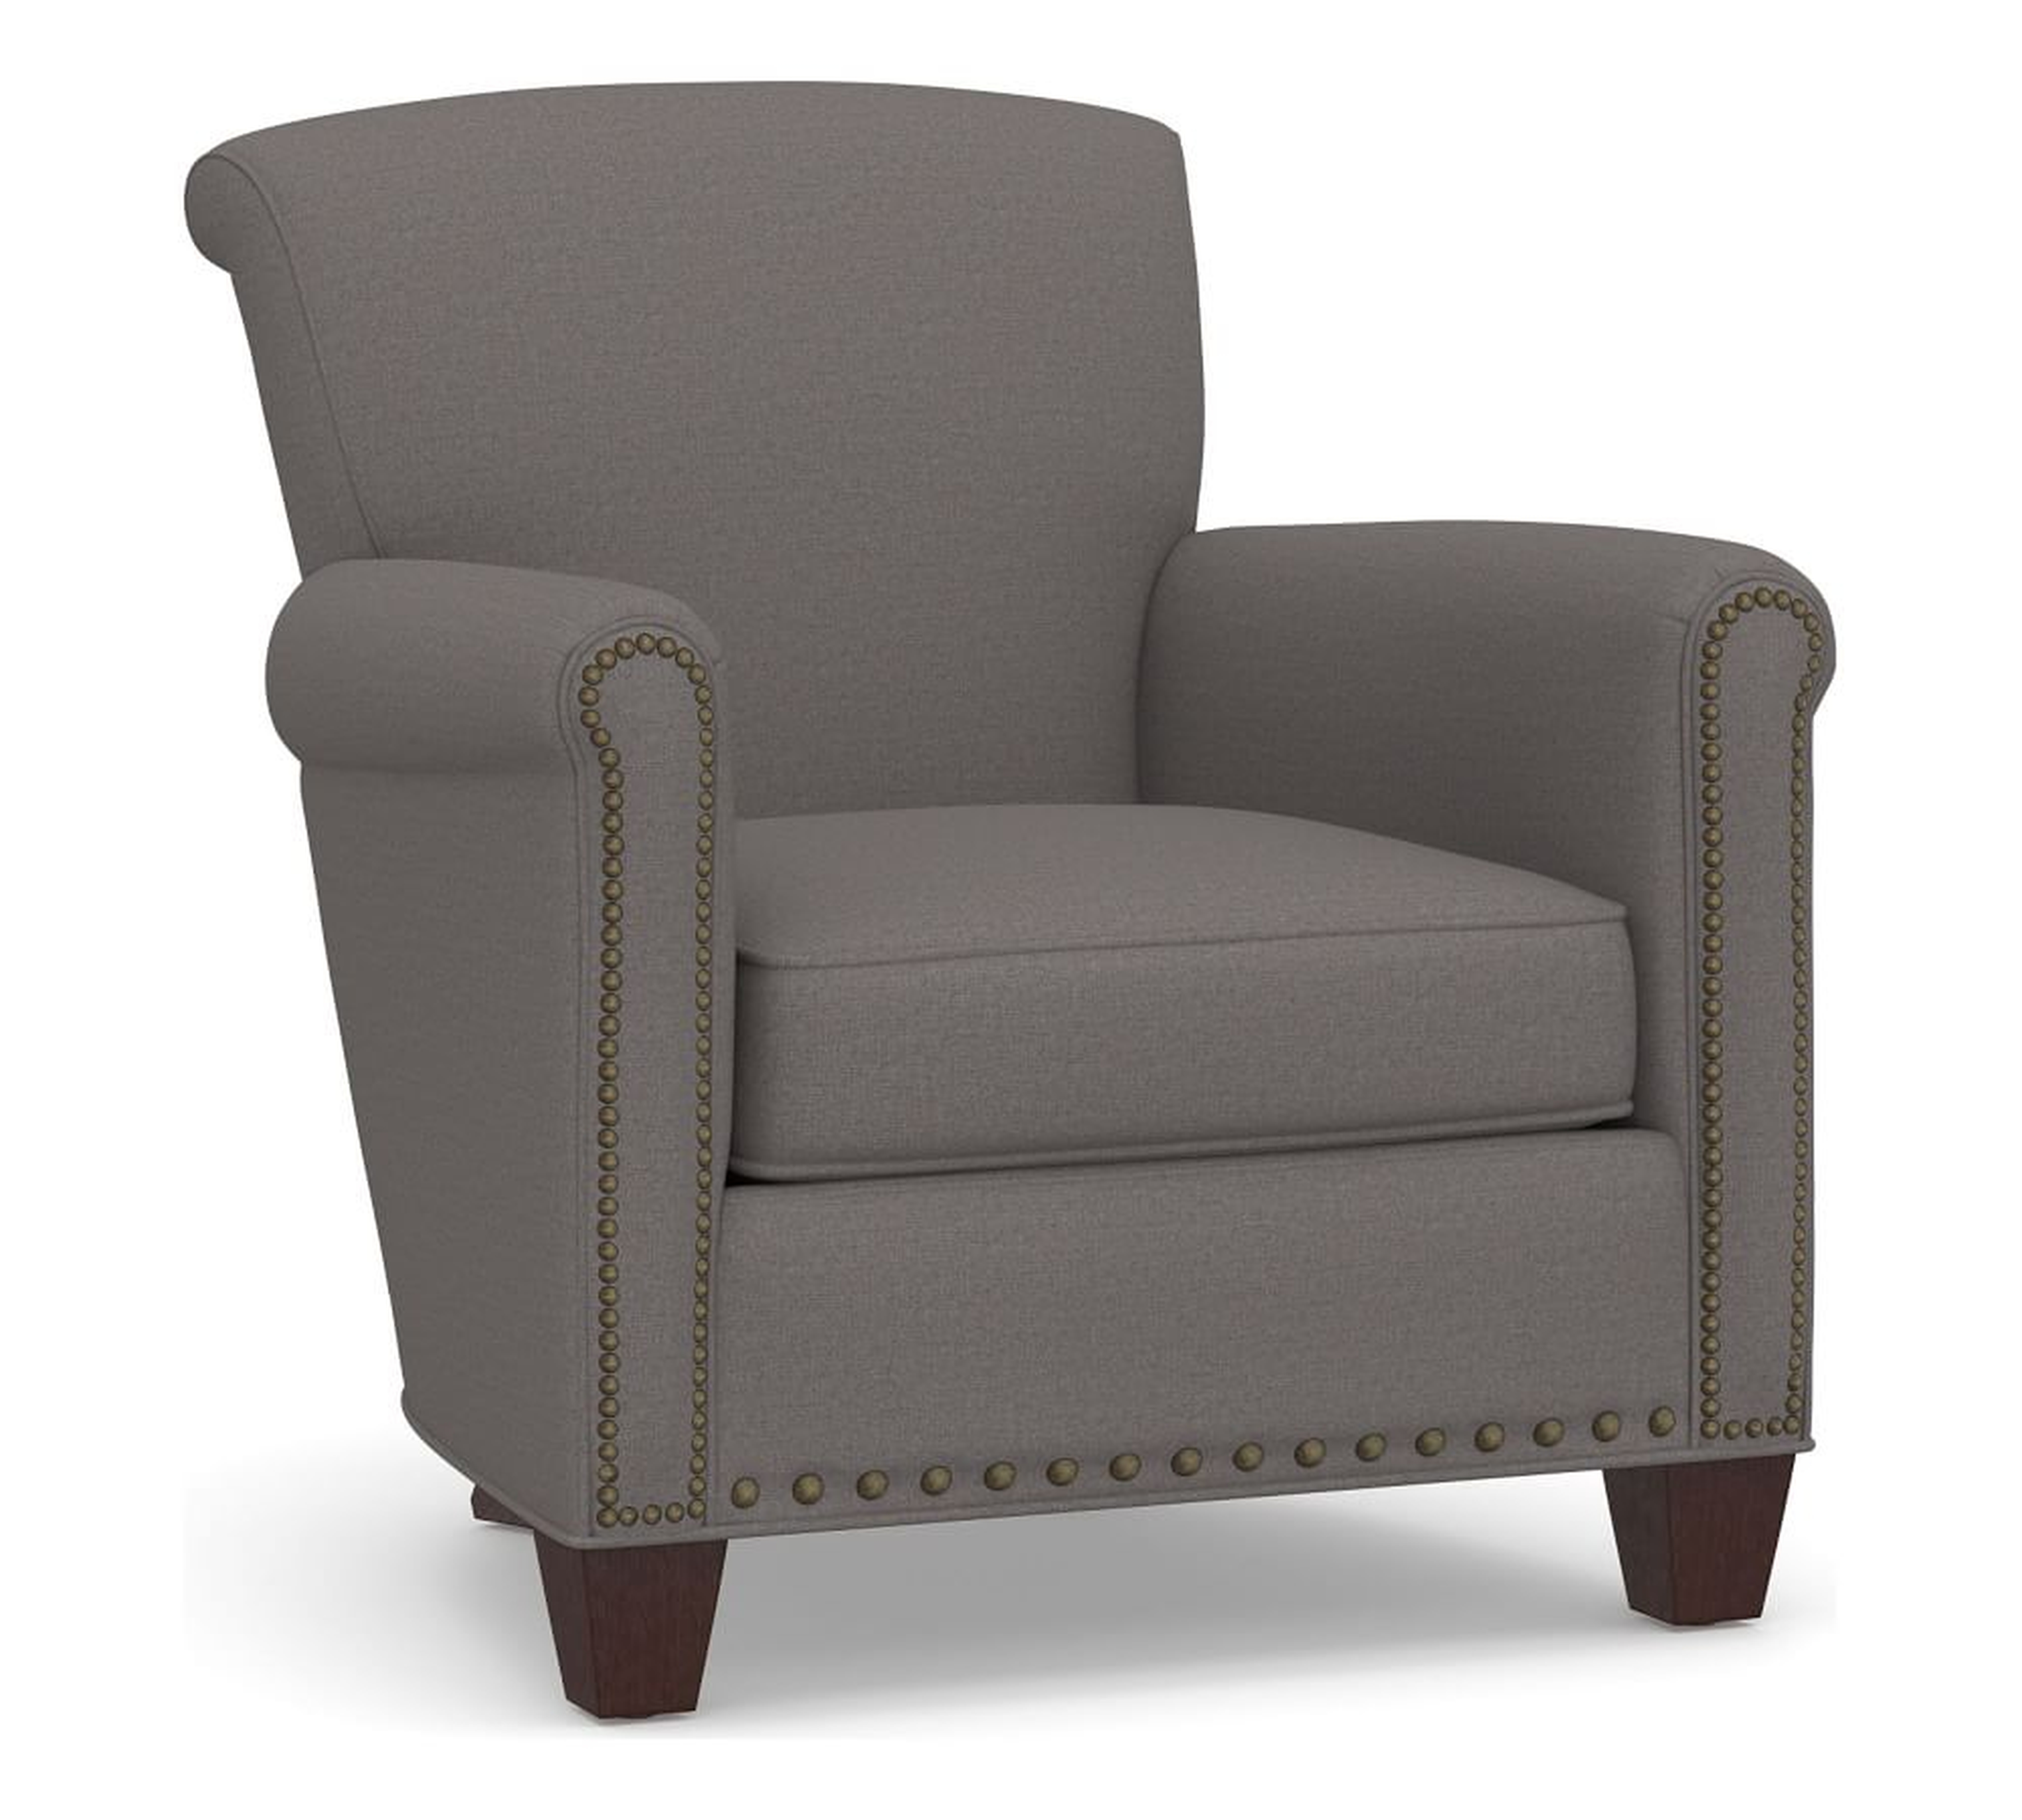 Irving Roll Arm Upholstered Armchair with Nailheads, Polyester Wrapped Cushions, Sunbrella(R) Performance Slub Tweed Charcoal - Pottery Barn